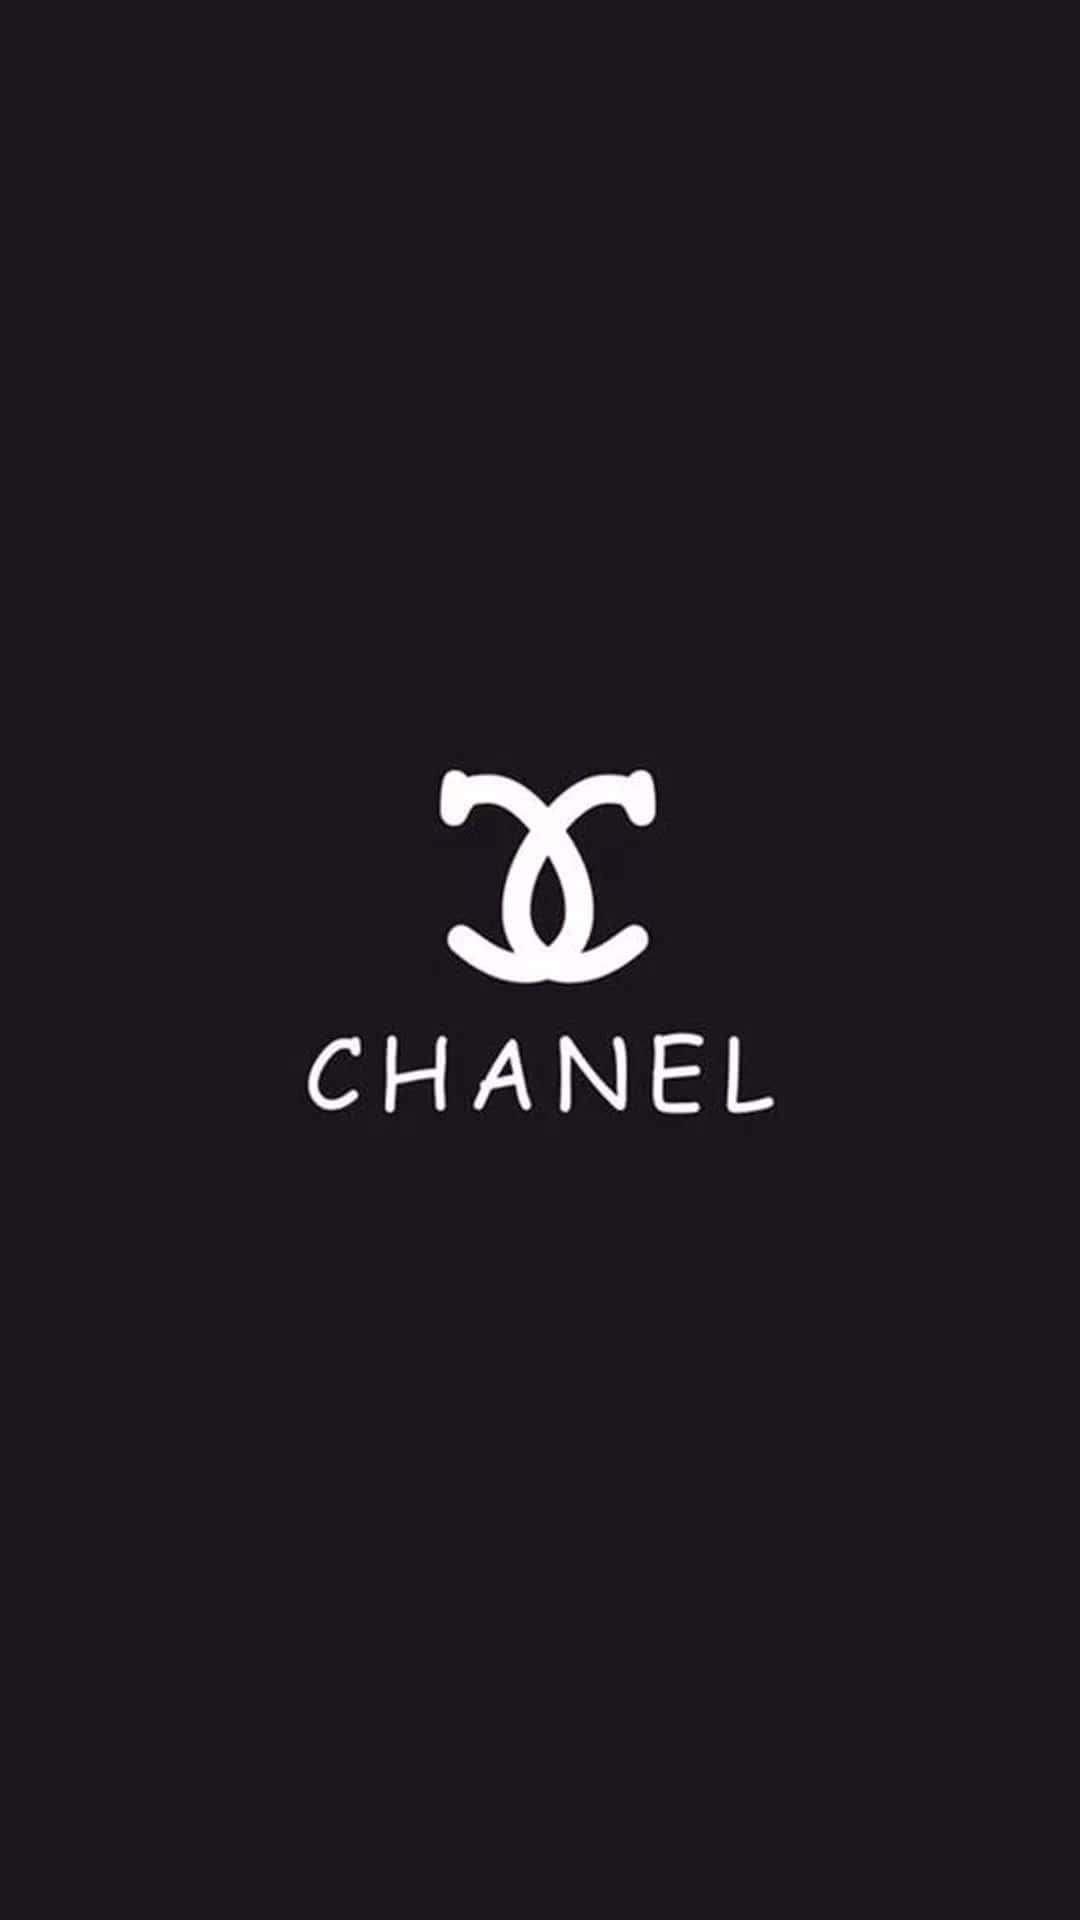 Download Chanel Logo On A Black Background | Wallpapers.com